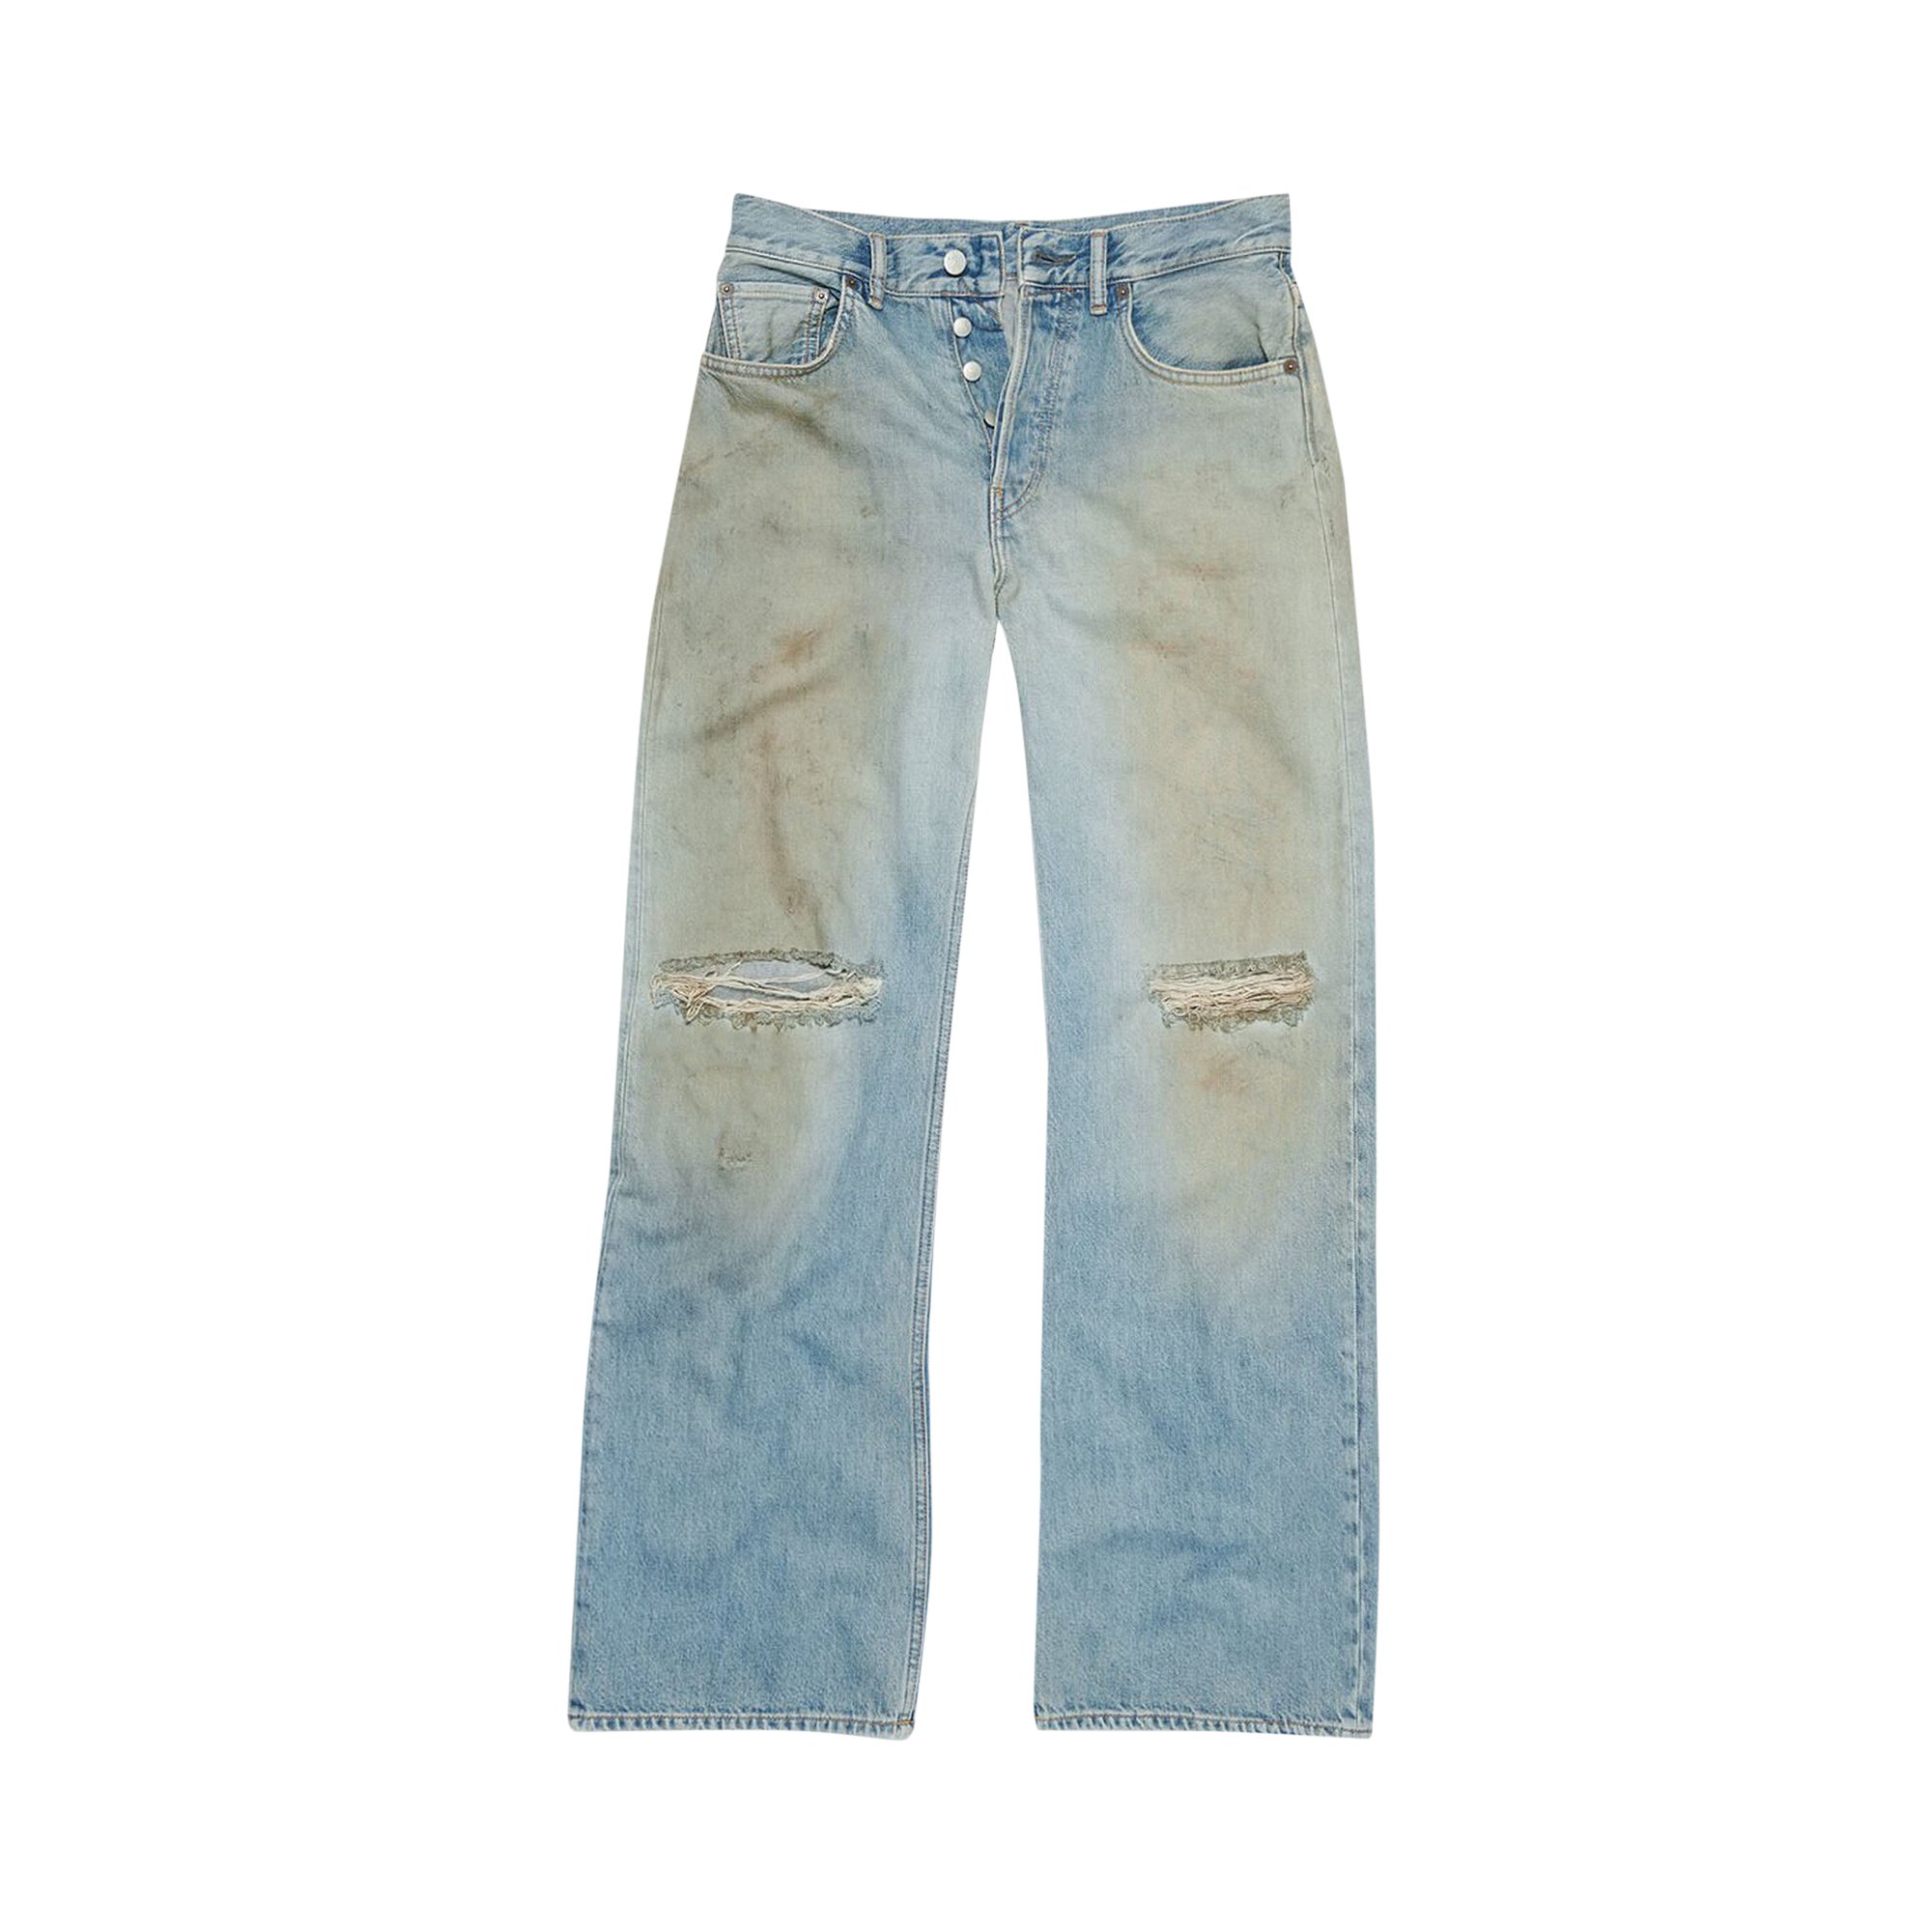 Buy Acne Studios Loose Fit Jeans 'Mid Blue' - A00402 GOAT MID